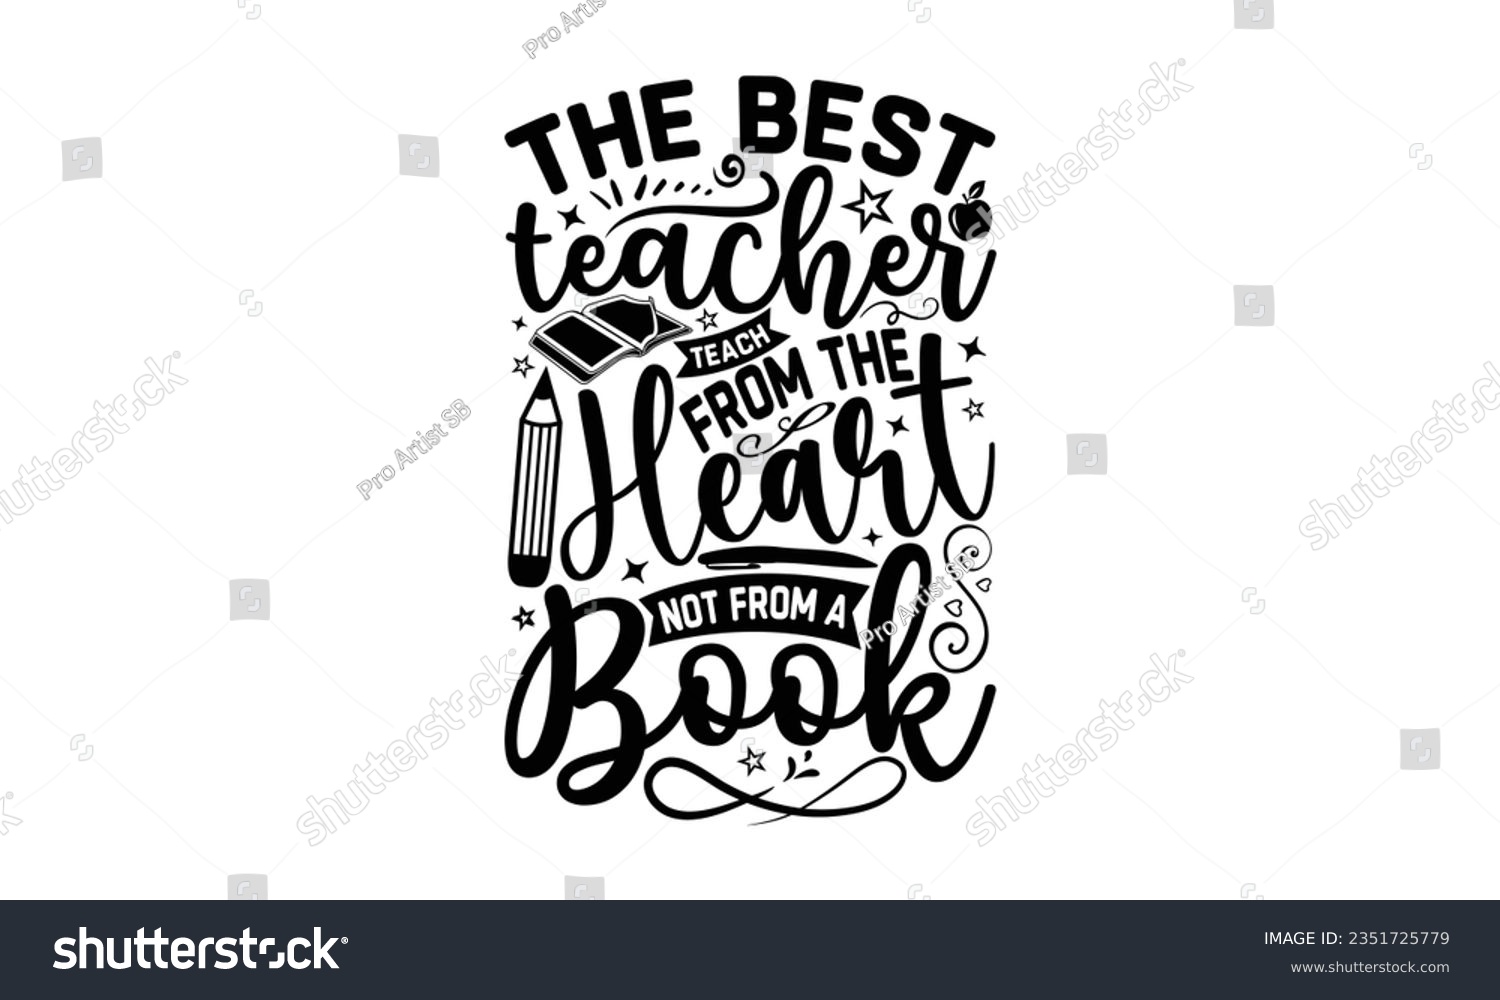 SVG of The best teacher teach from the heart not from a book - Teacher SVG Design, Teacher Lettering Design, Vector EPS Editable Files, Isolated On White Background, Prints on T-Shirts and Bags, Posters, Car svg